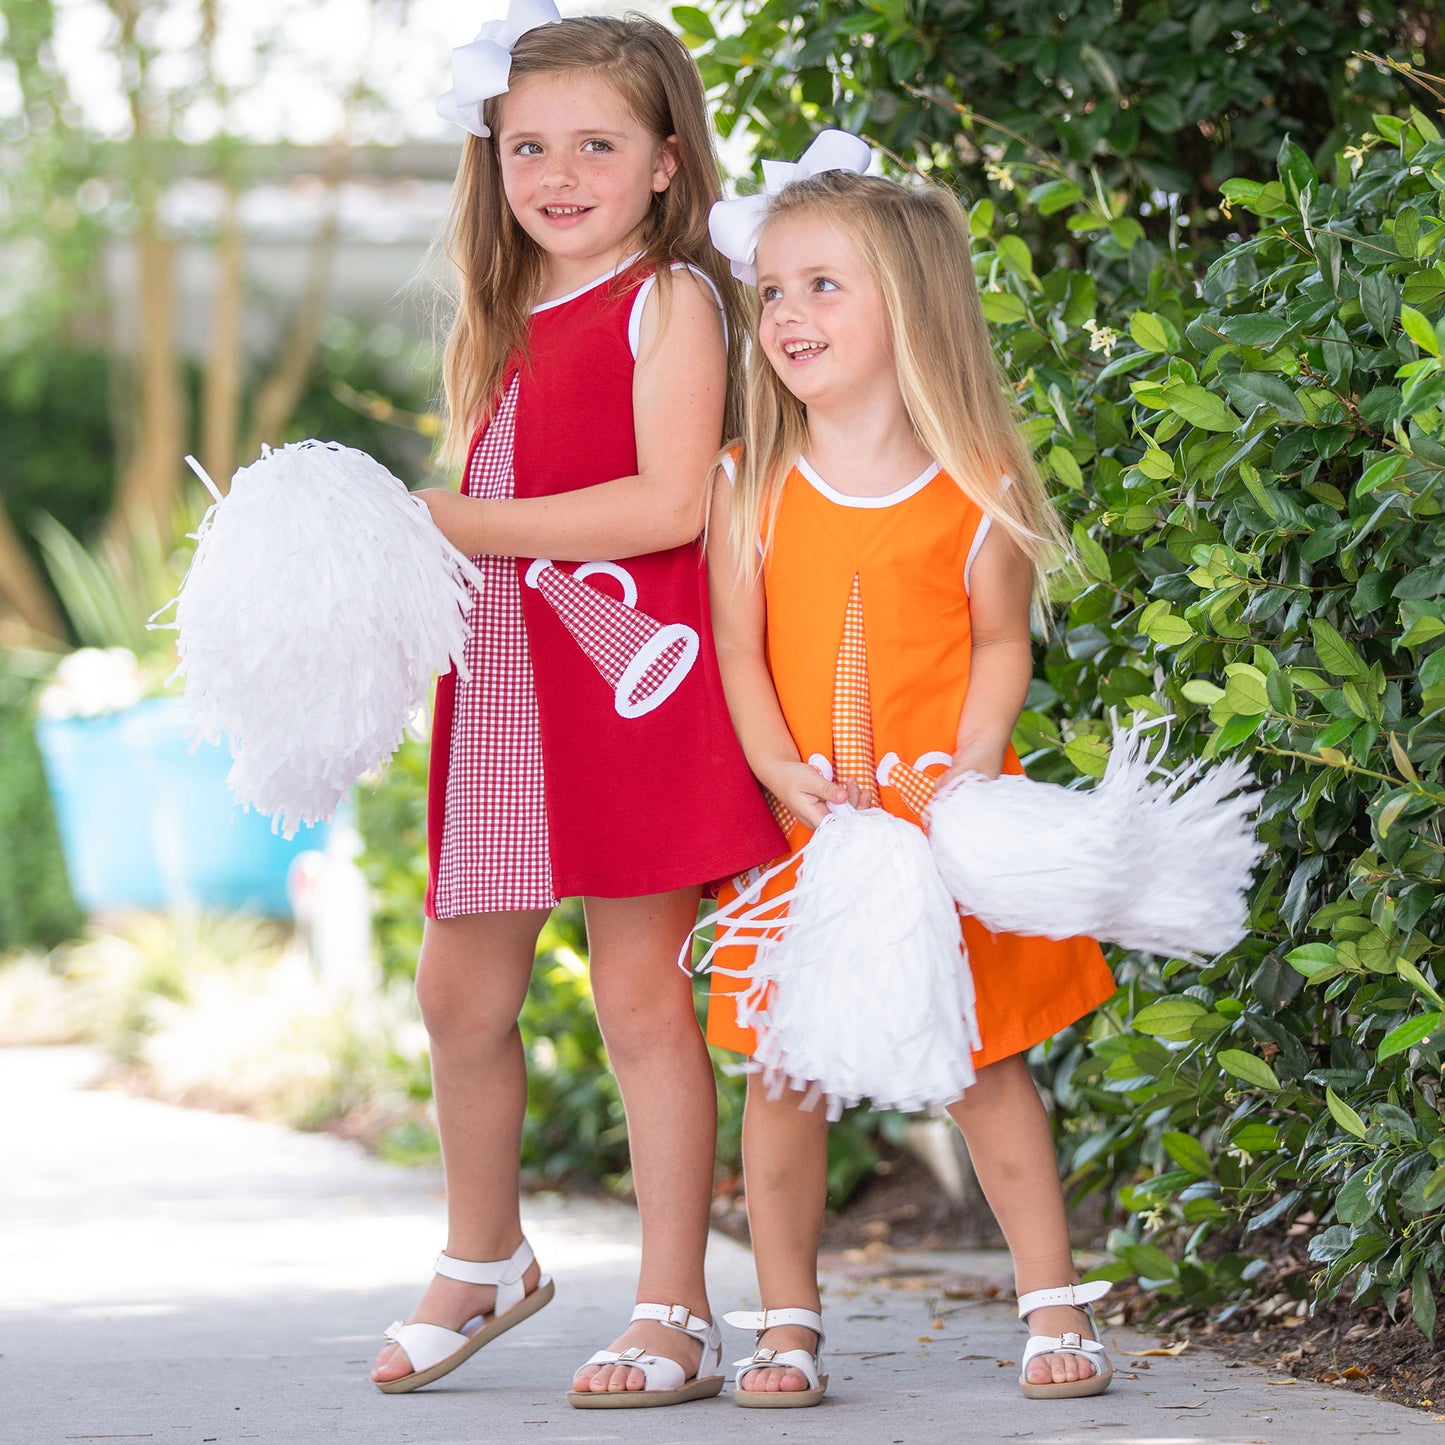 little girls in red and orange dresses with megaphones and pom poms